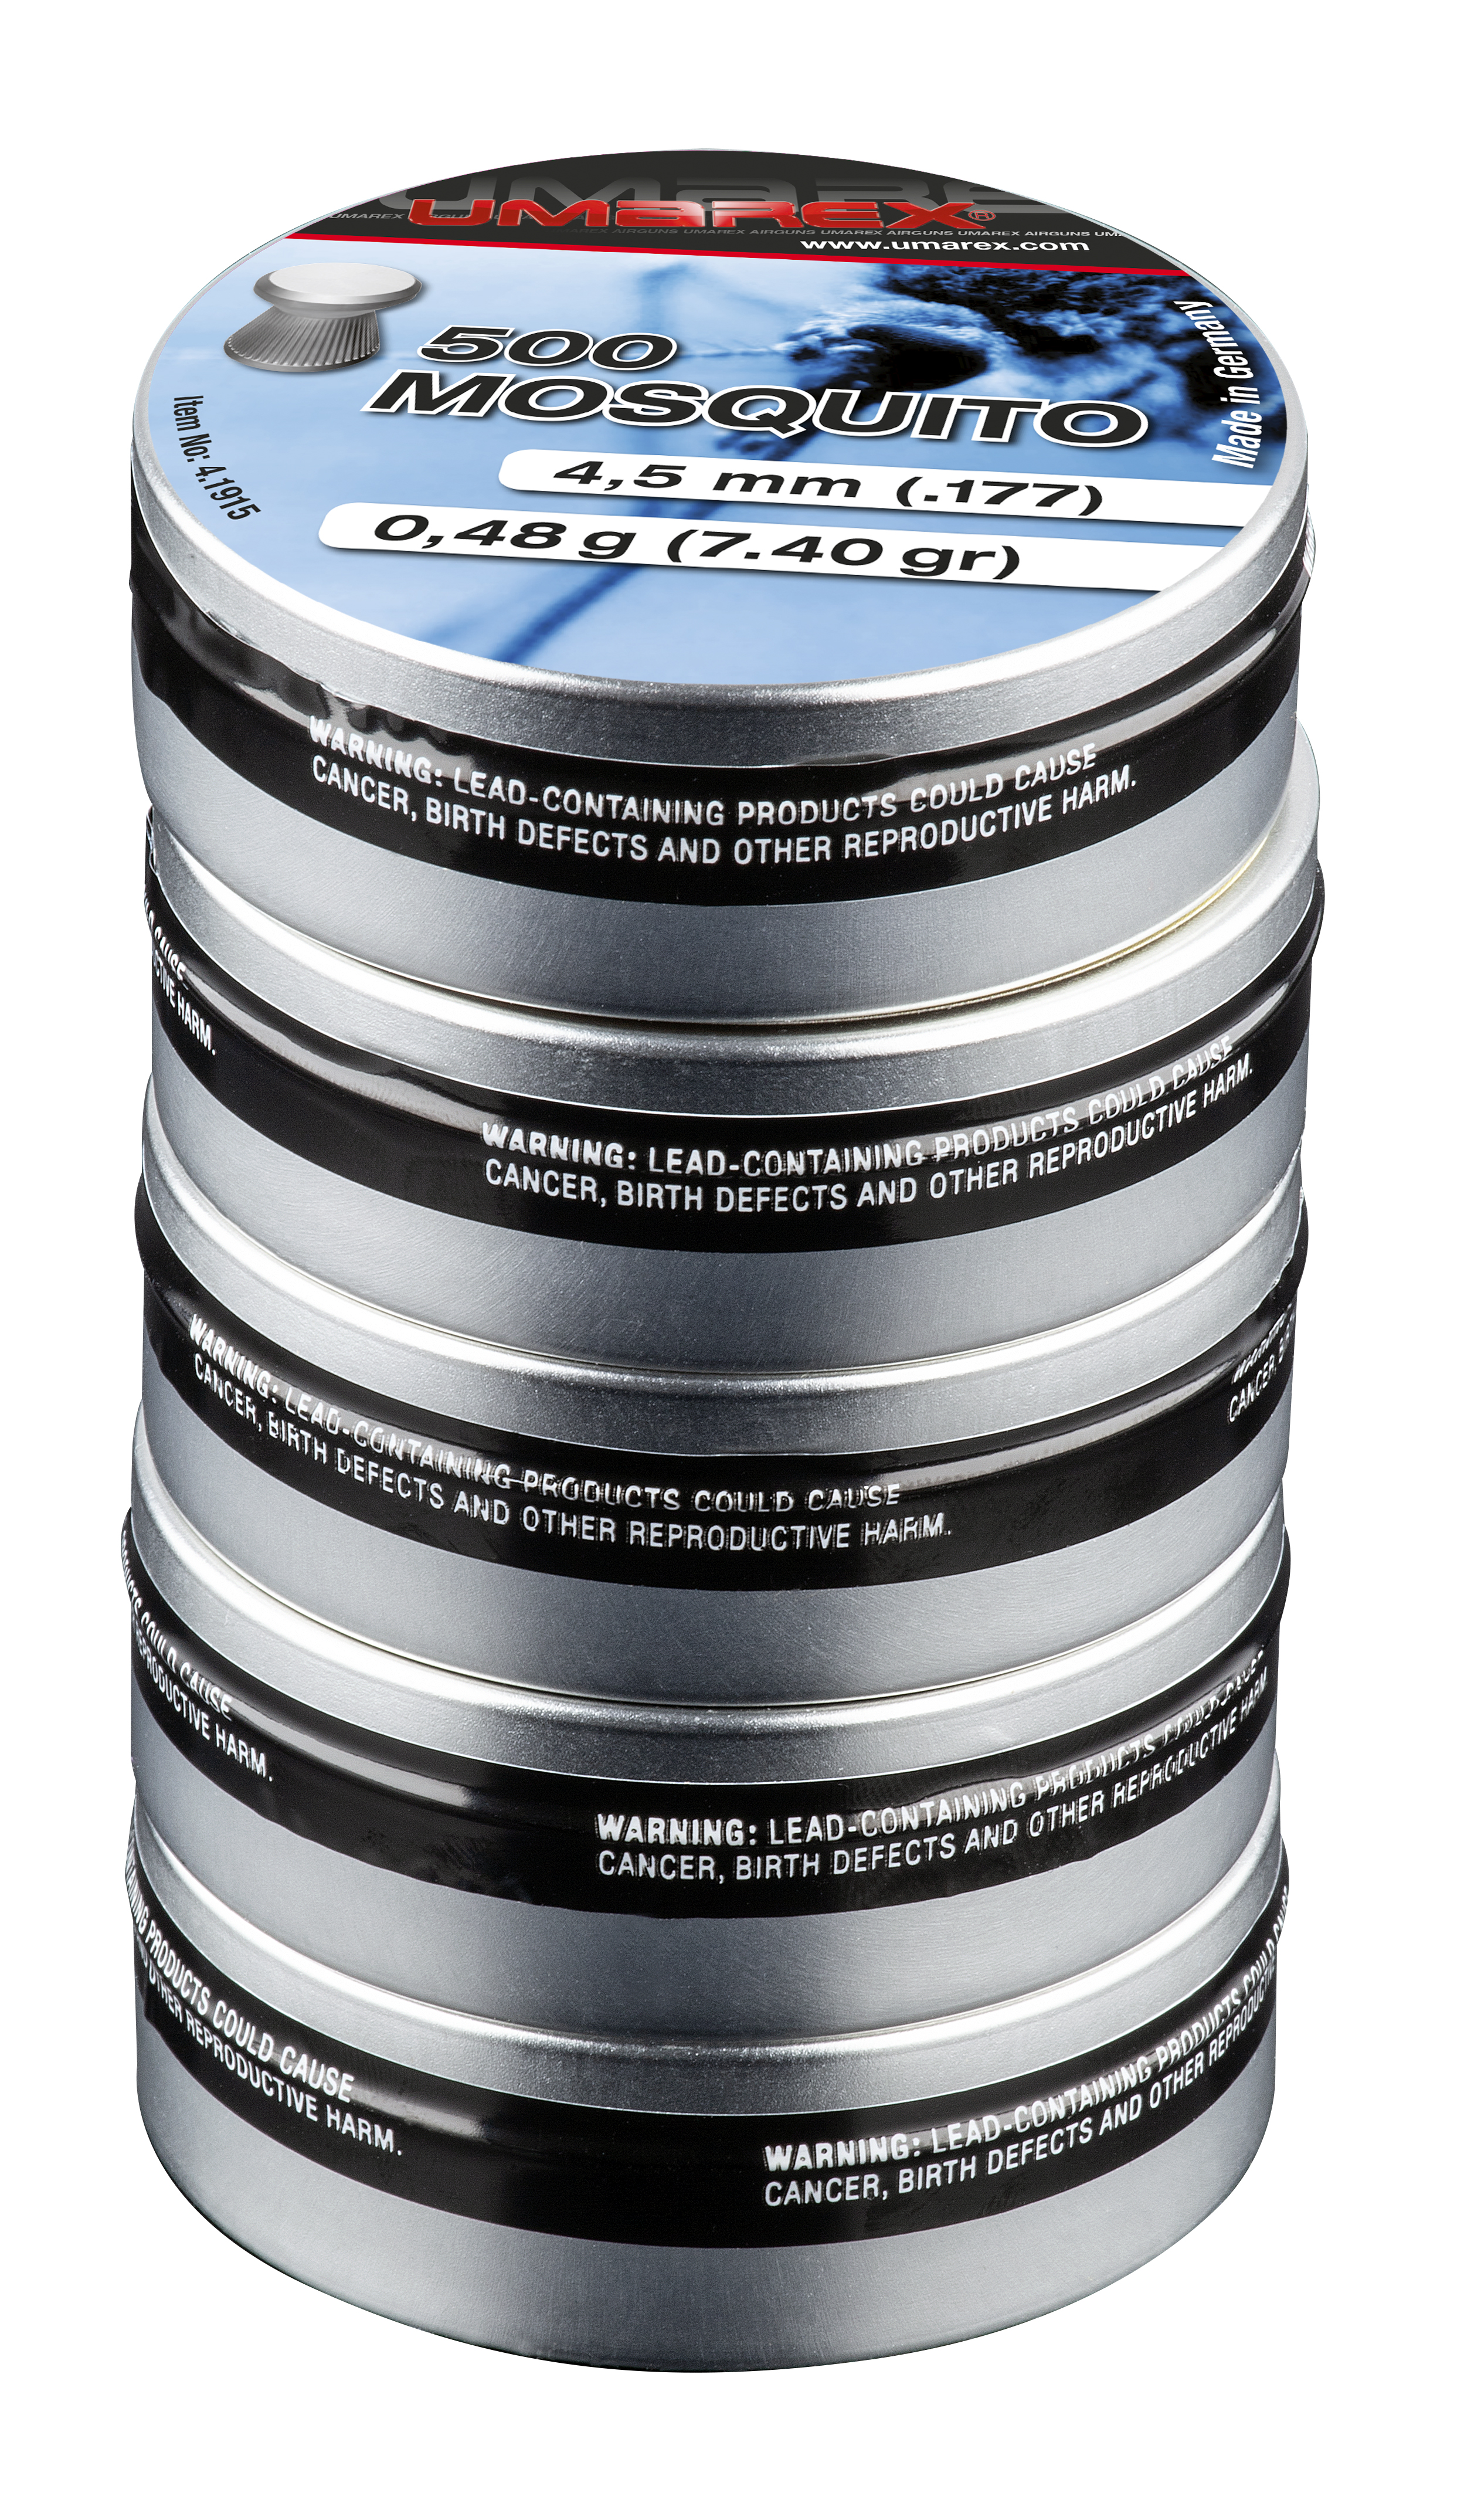 UMAREX Pellets Mosquito (Pack of 5 Tins)